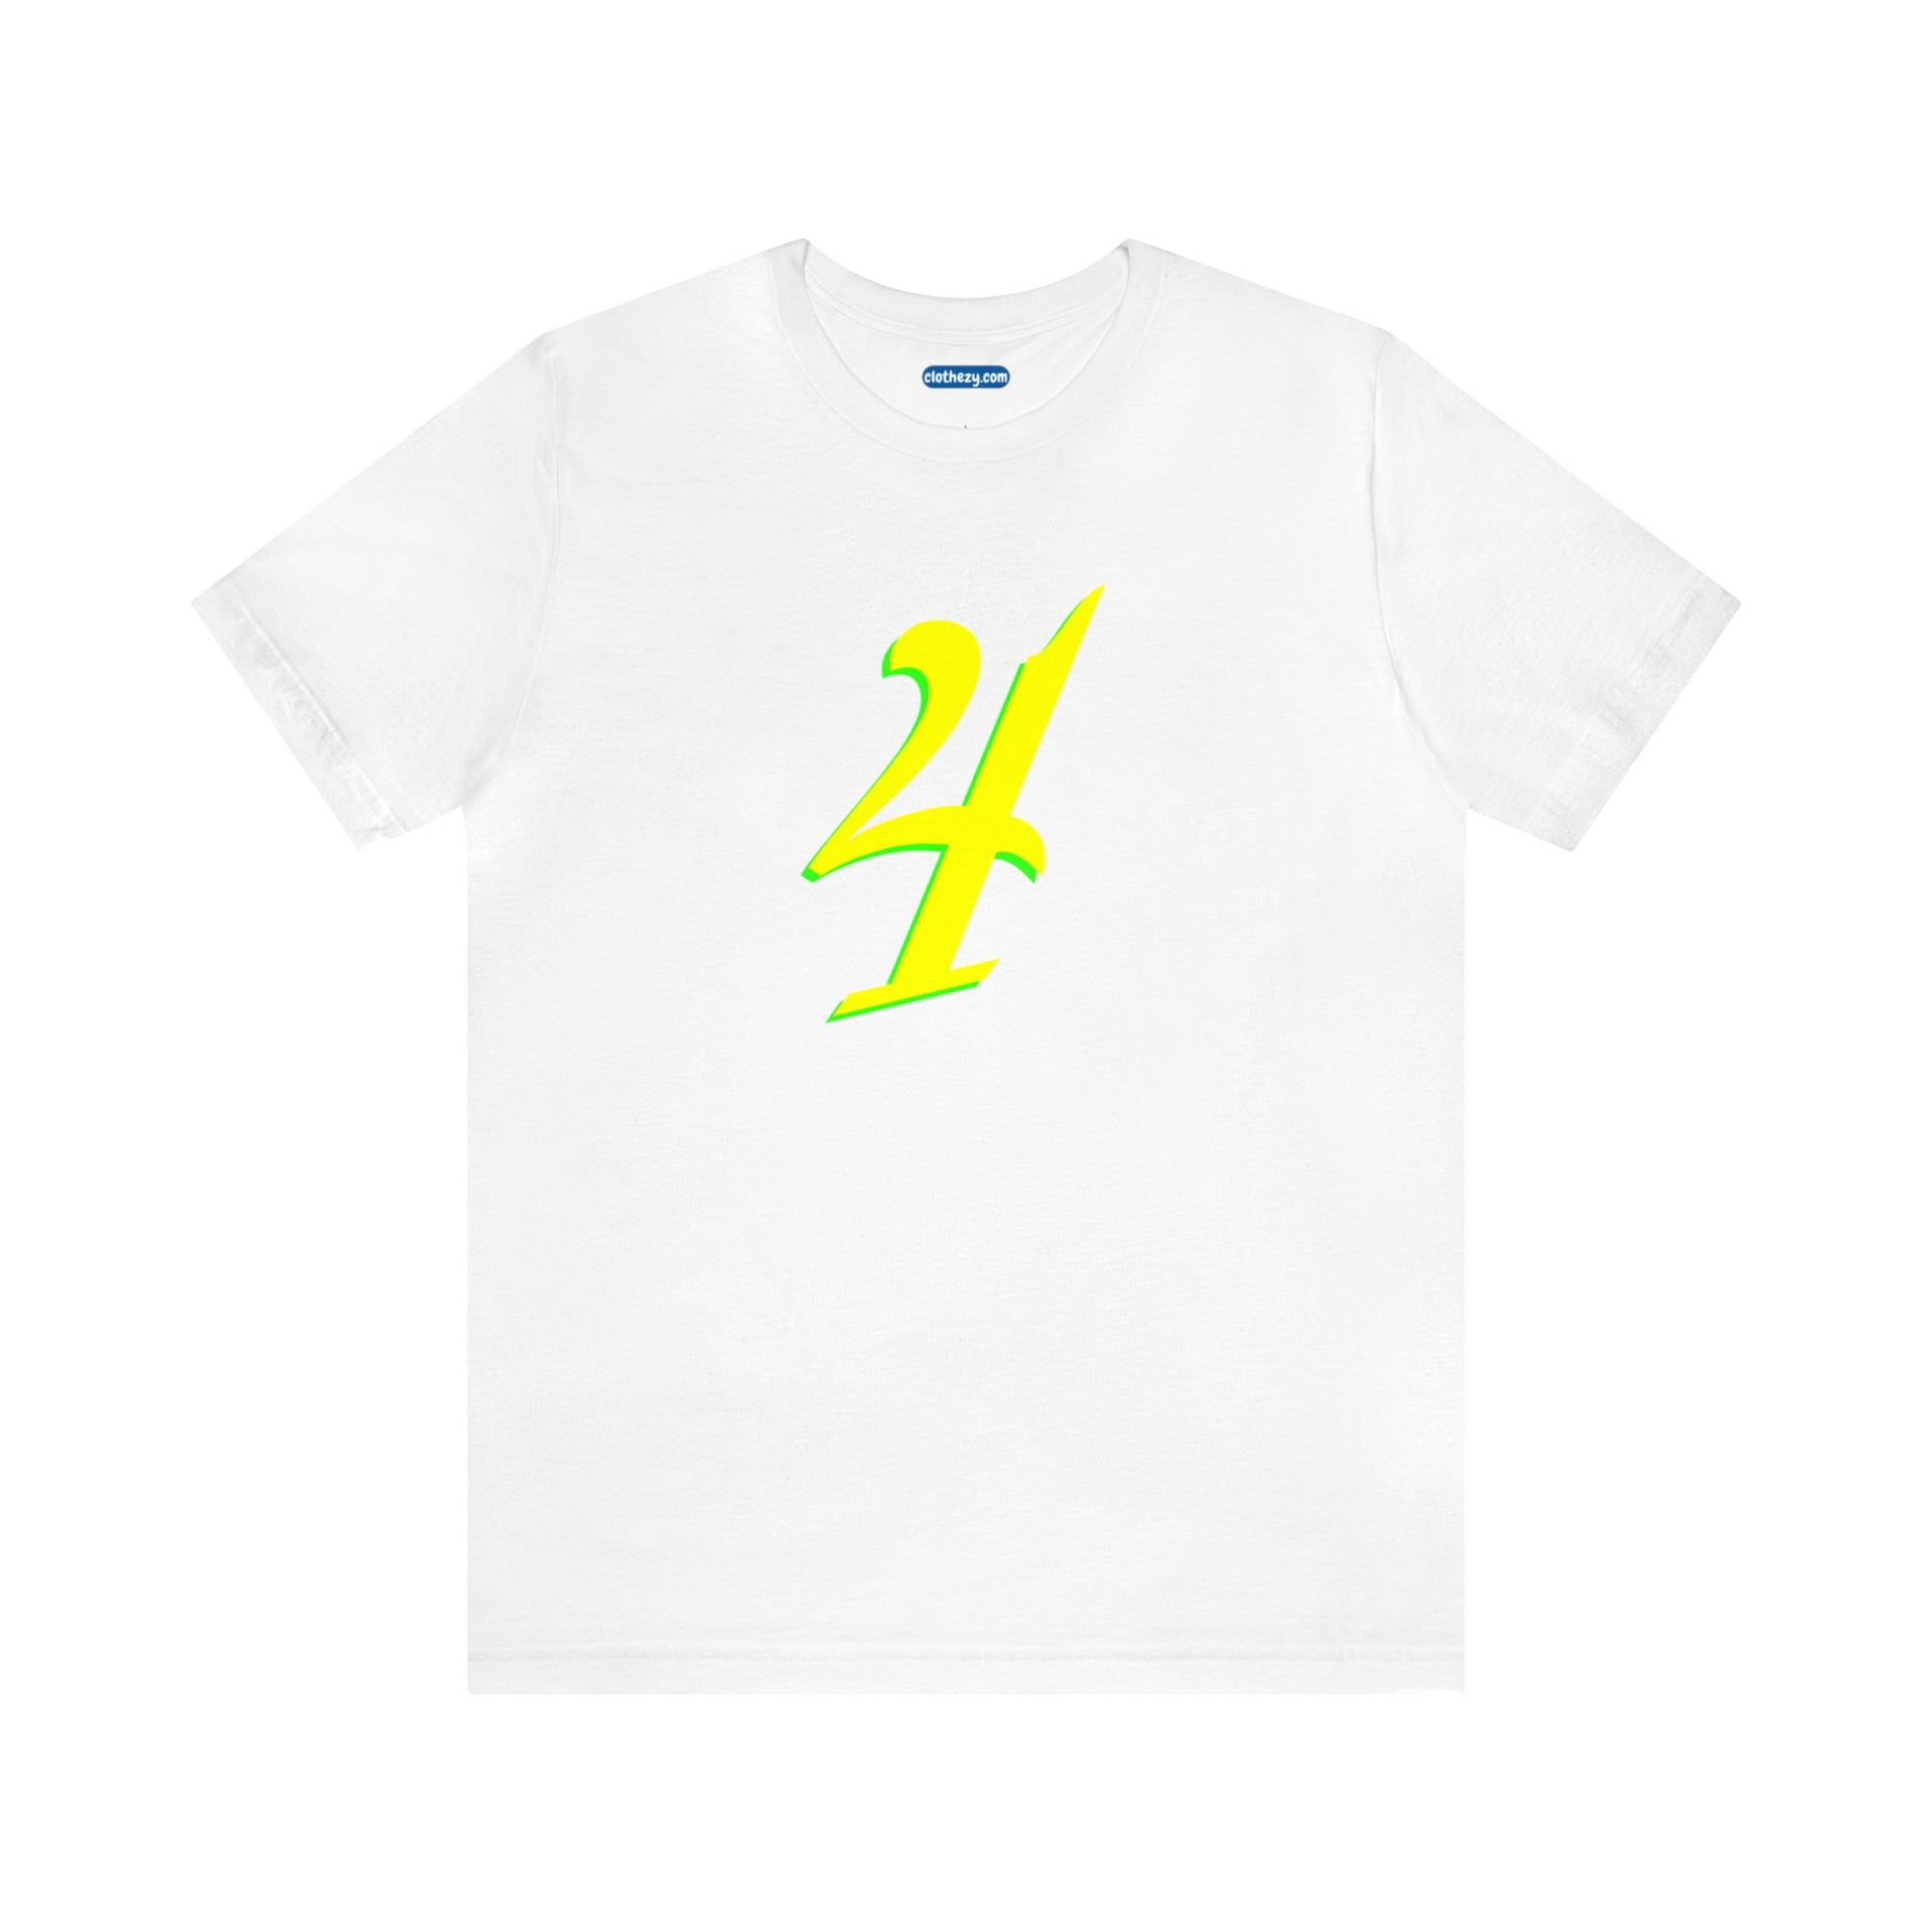 Number 4 Design - Soft Cotton Tee for birthdays and celebrations, Gift for friends and family, Multiple Options by clothezy.com in White Size Small - Buy Now